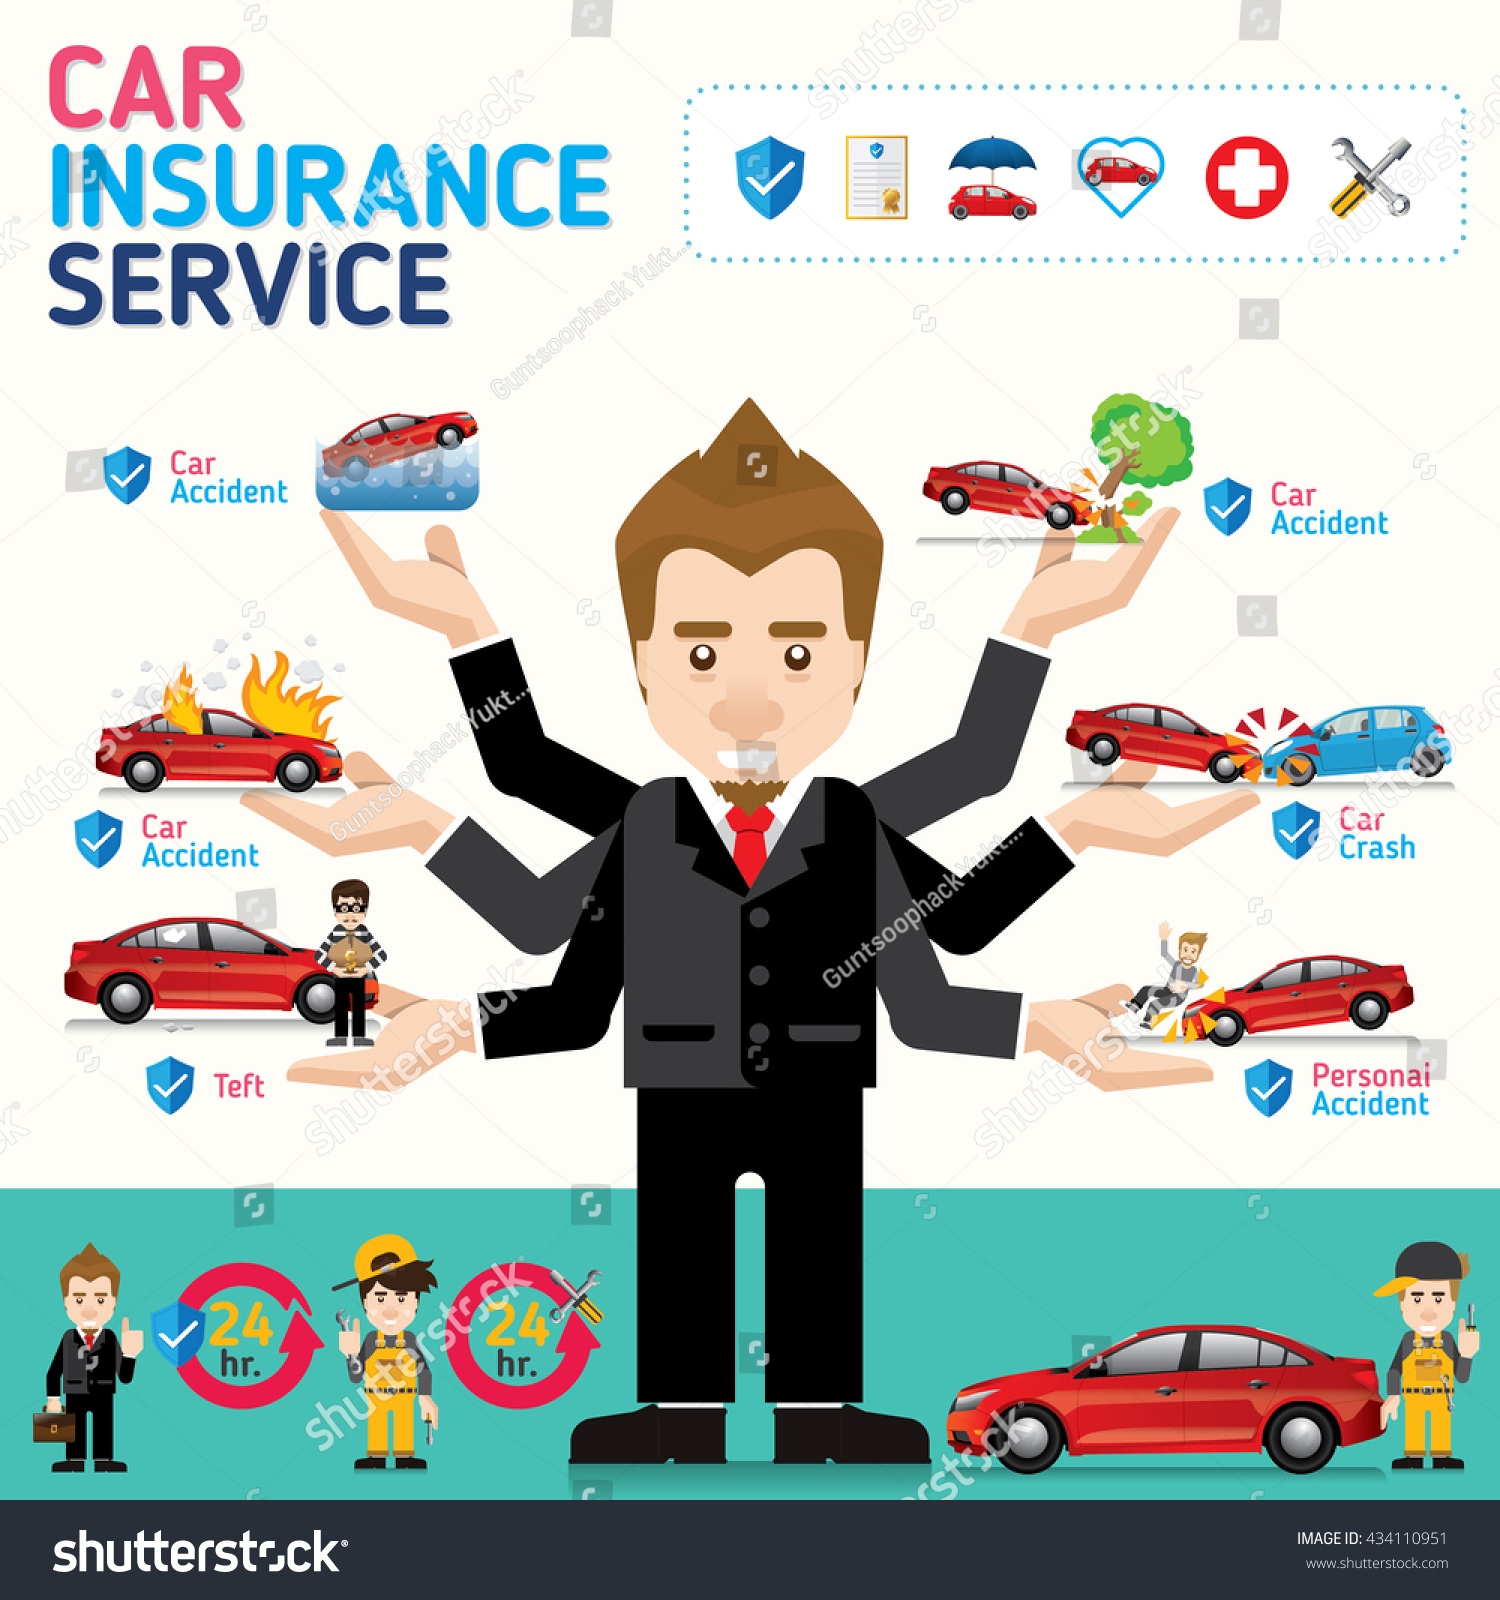 Car Insurance Business Service Icons Template Stock Vector in measurements 1500 X 1600